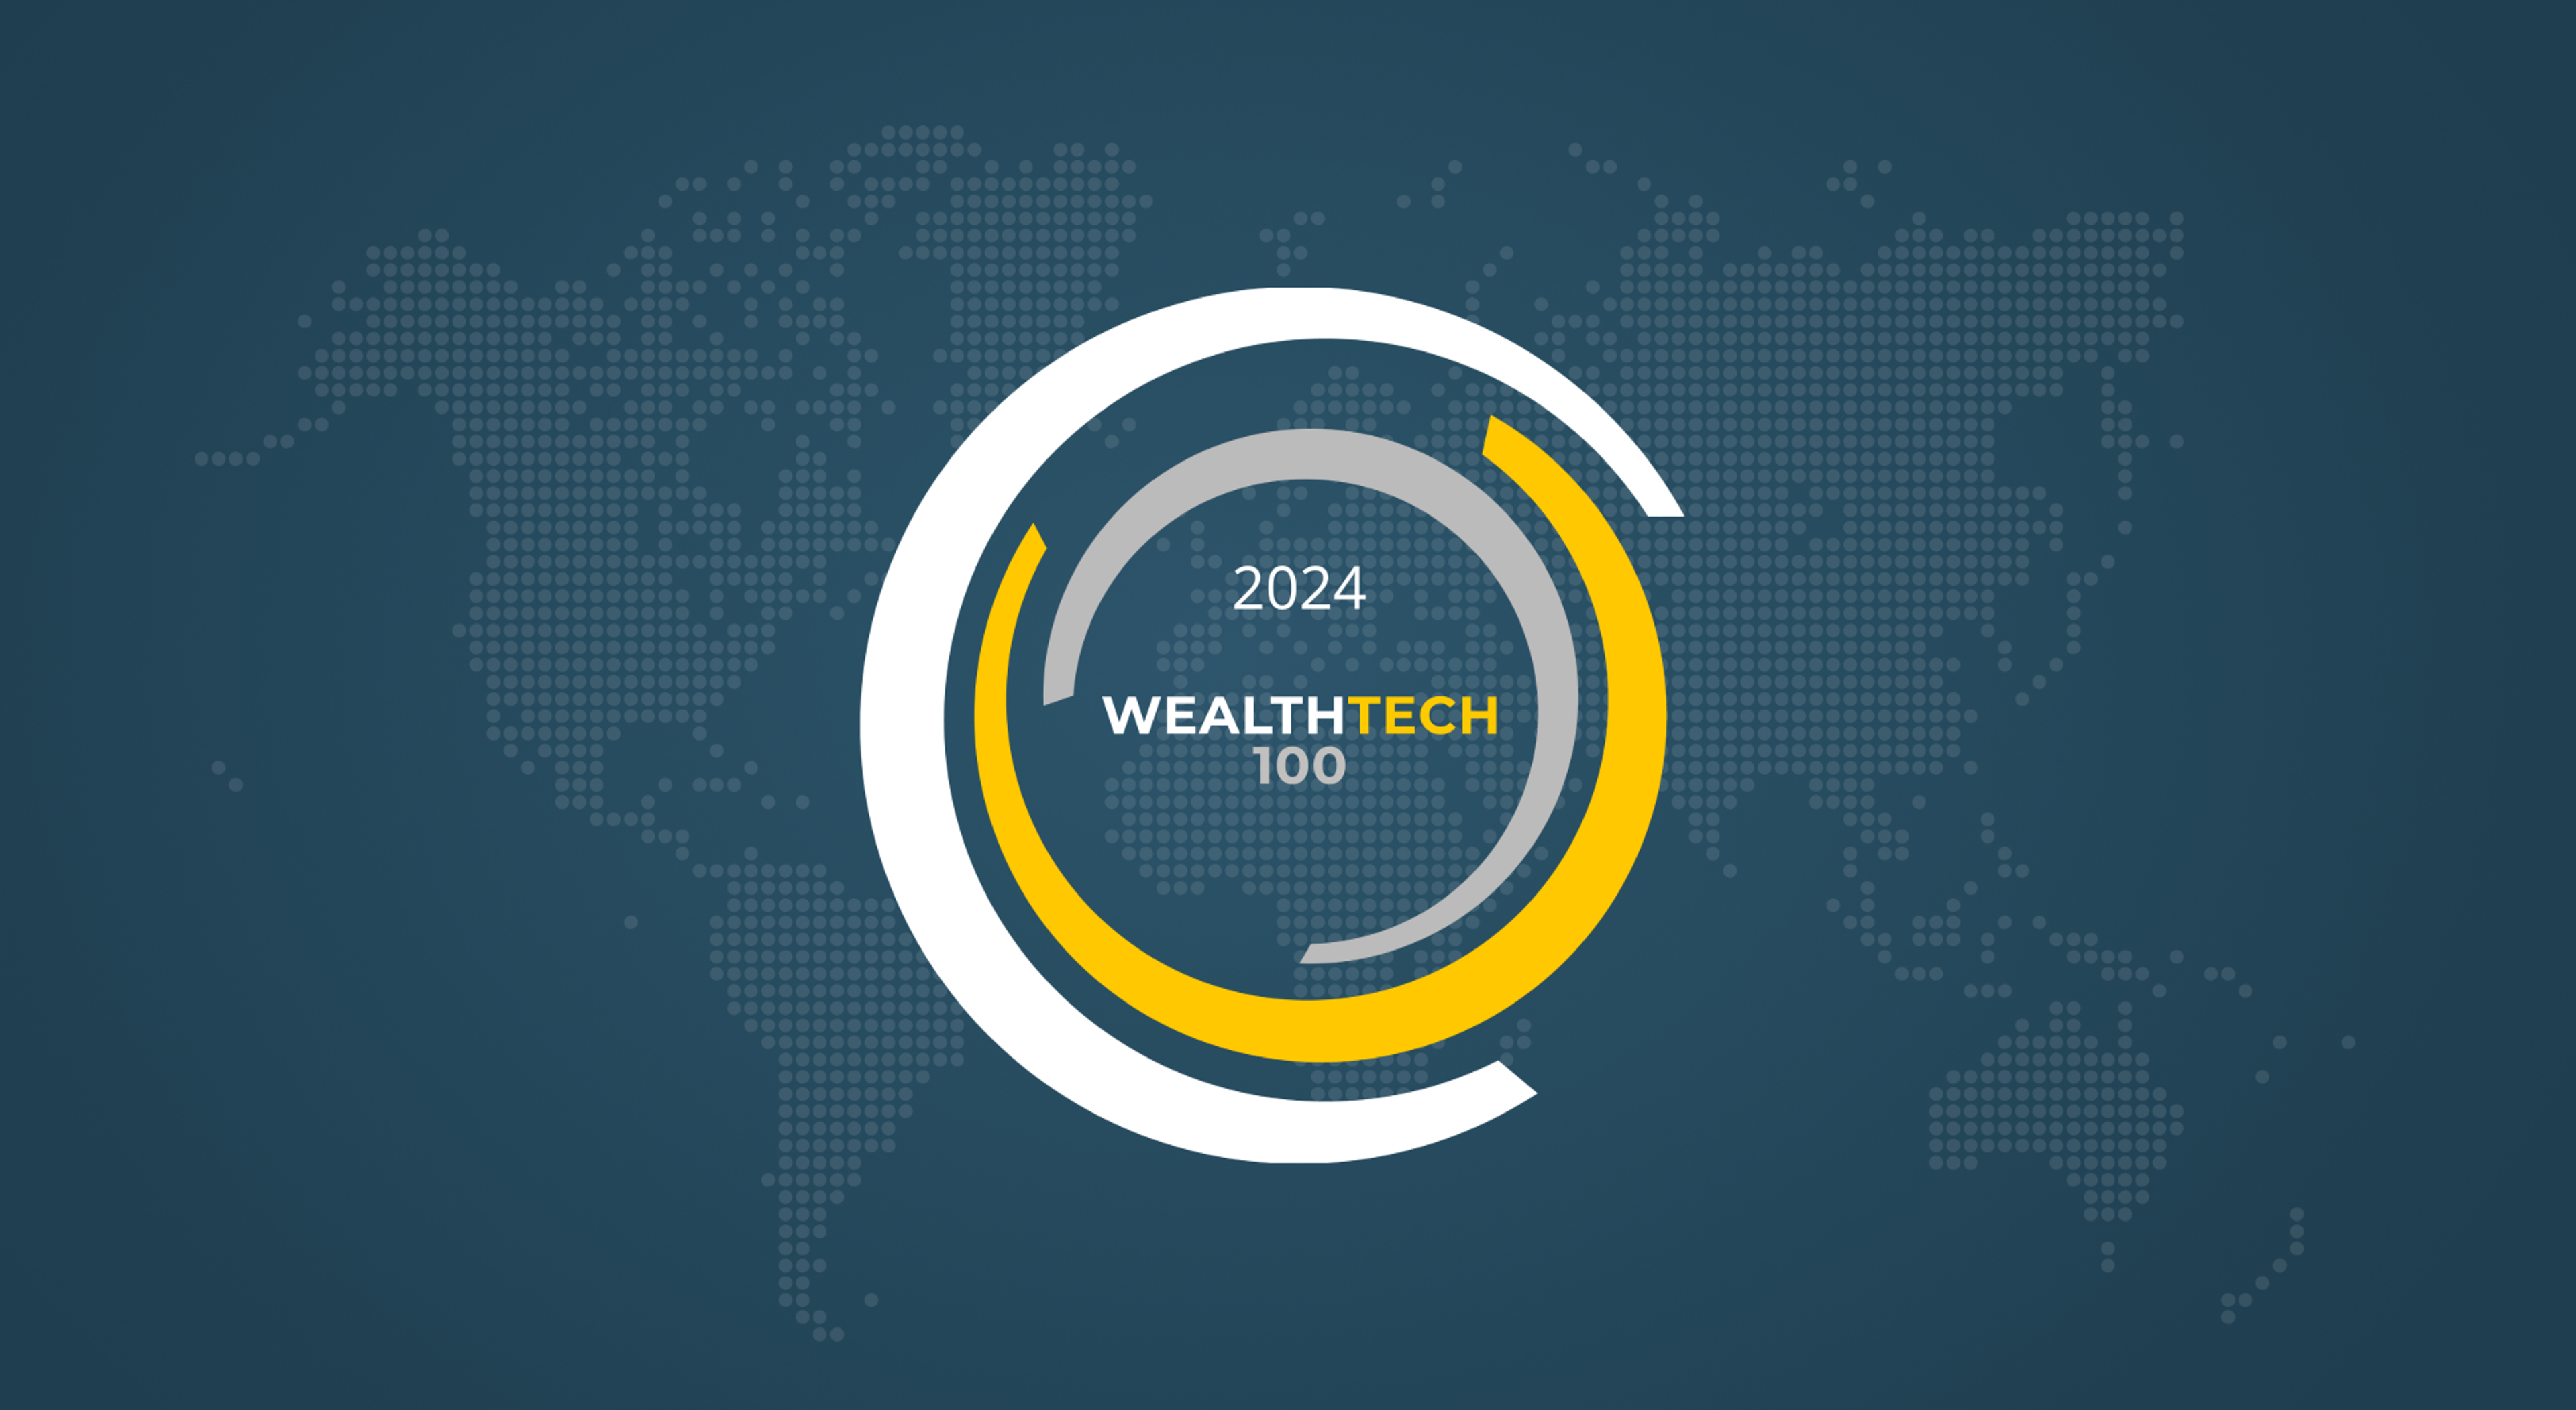 WealthTech100 names Luminary as a top company transforming wealth management